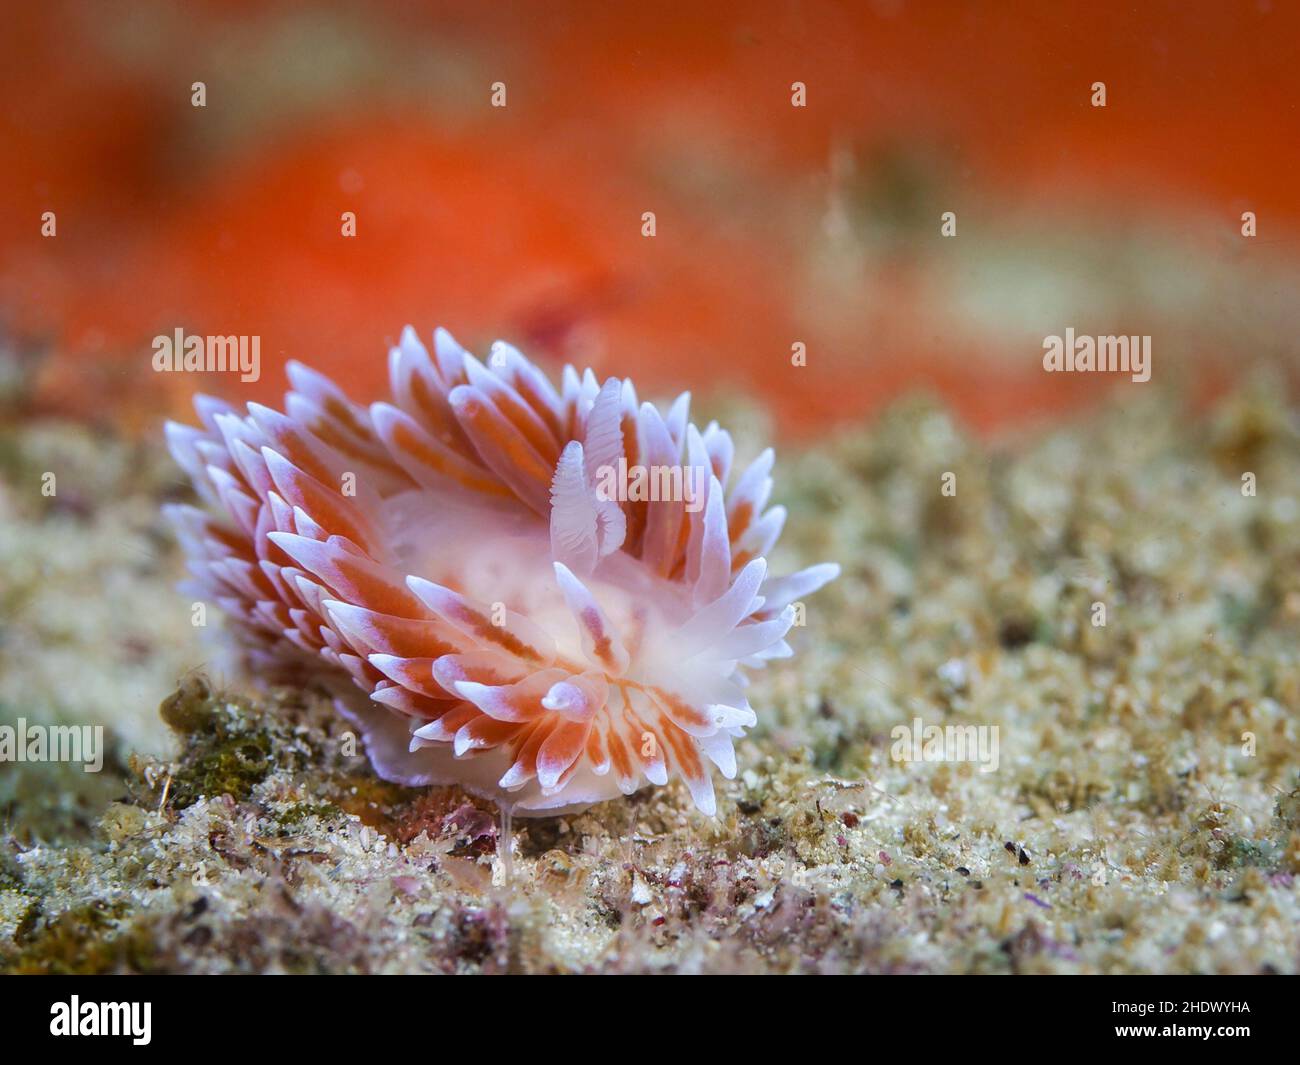 Silvertip nudibranch or sea slug underwater (Janolus capensis) moving over the reef. White body and brown cerata with white tips. Stock Photo